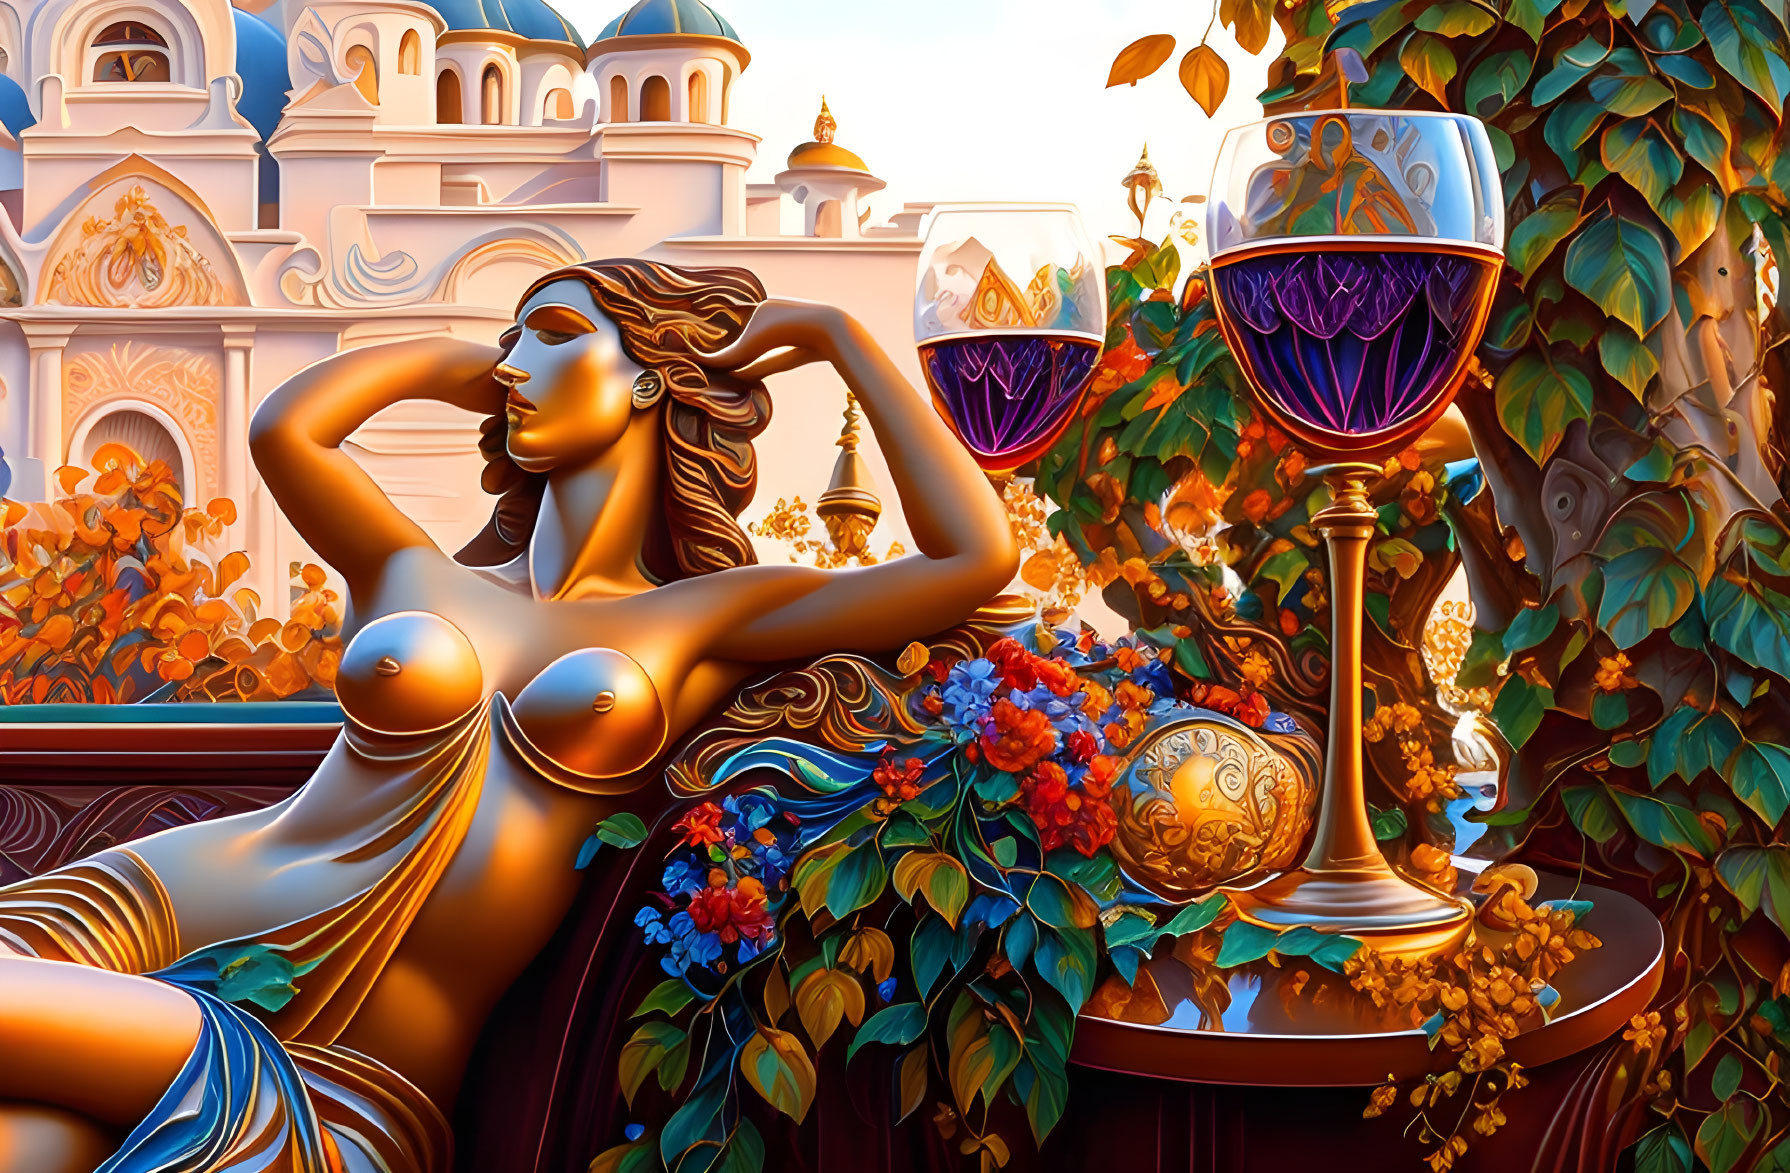 Vibrant stylized image of reclining woman with golden skin, goblets, vines, and